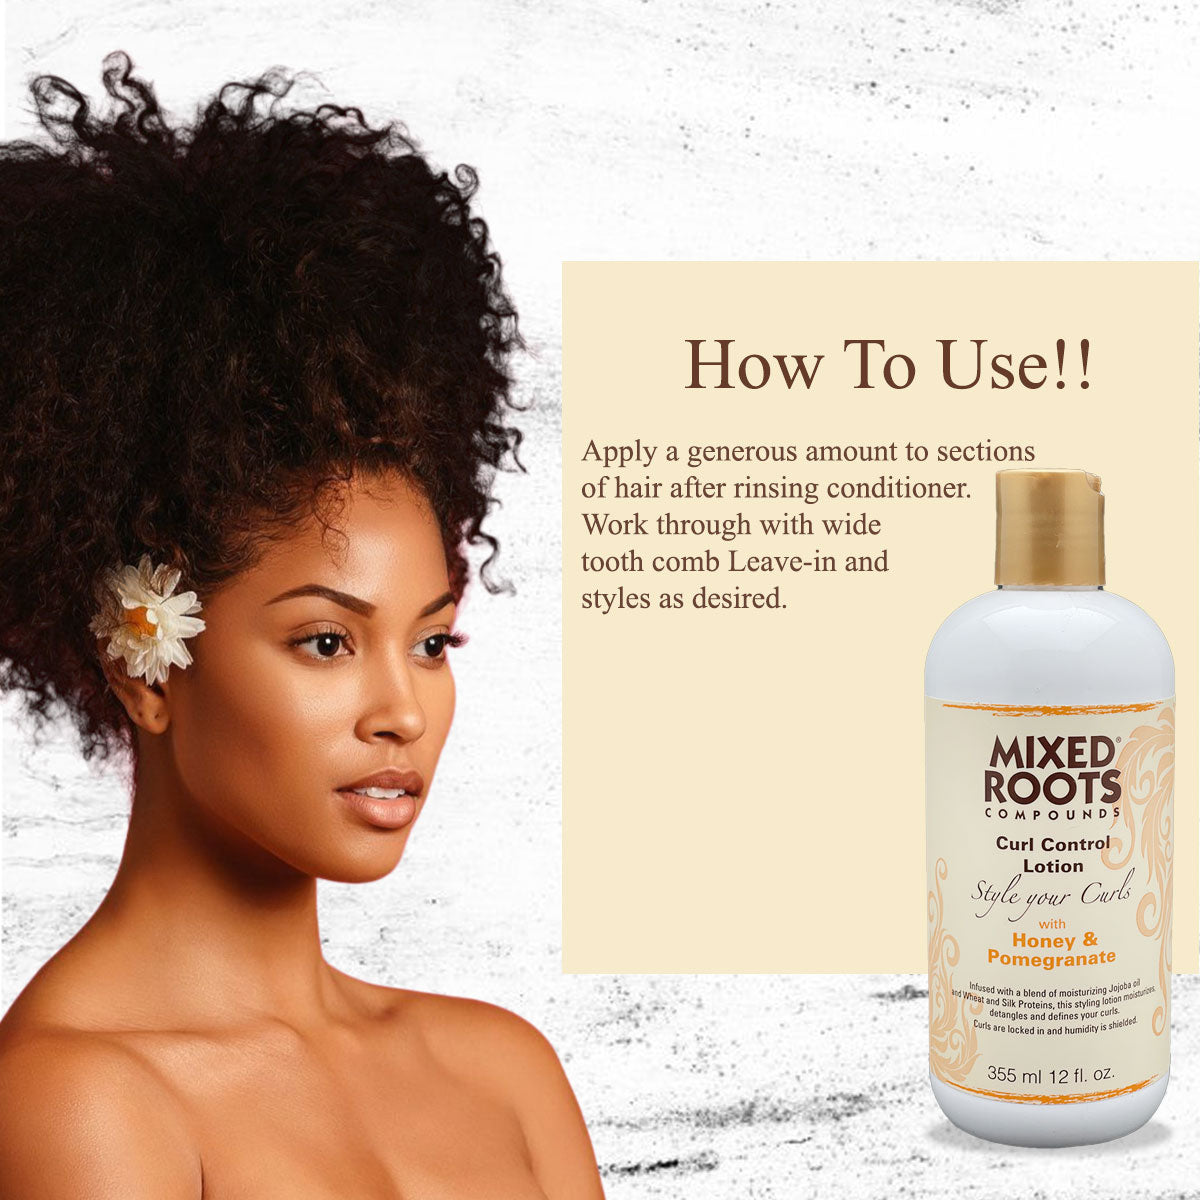 Mixed Roots Compounds Curl Control Lotion 355ml Style your Curl Honey & Pomegranate